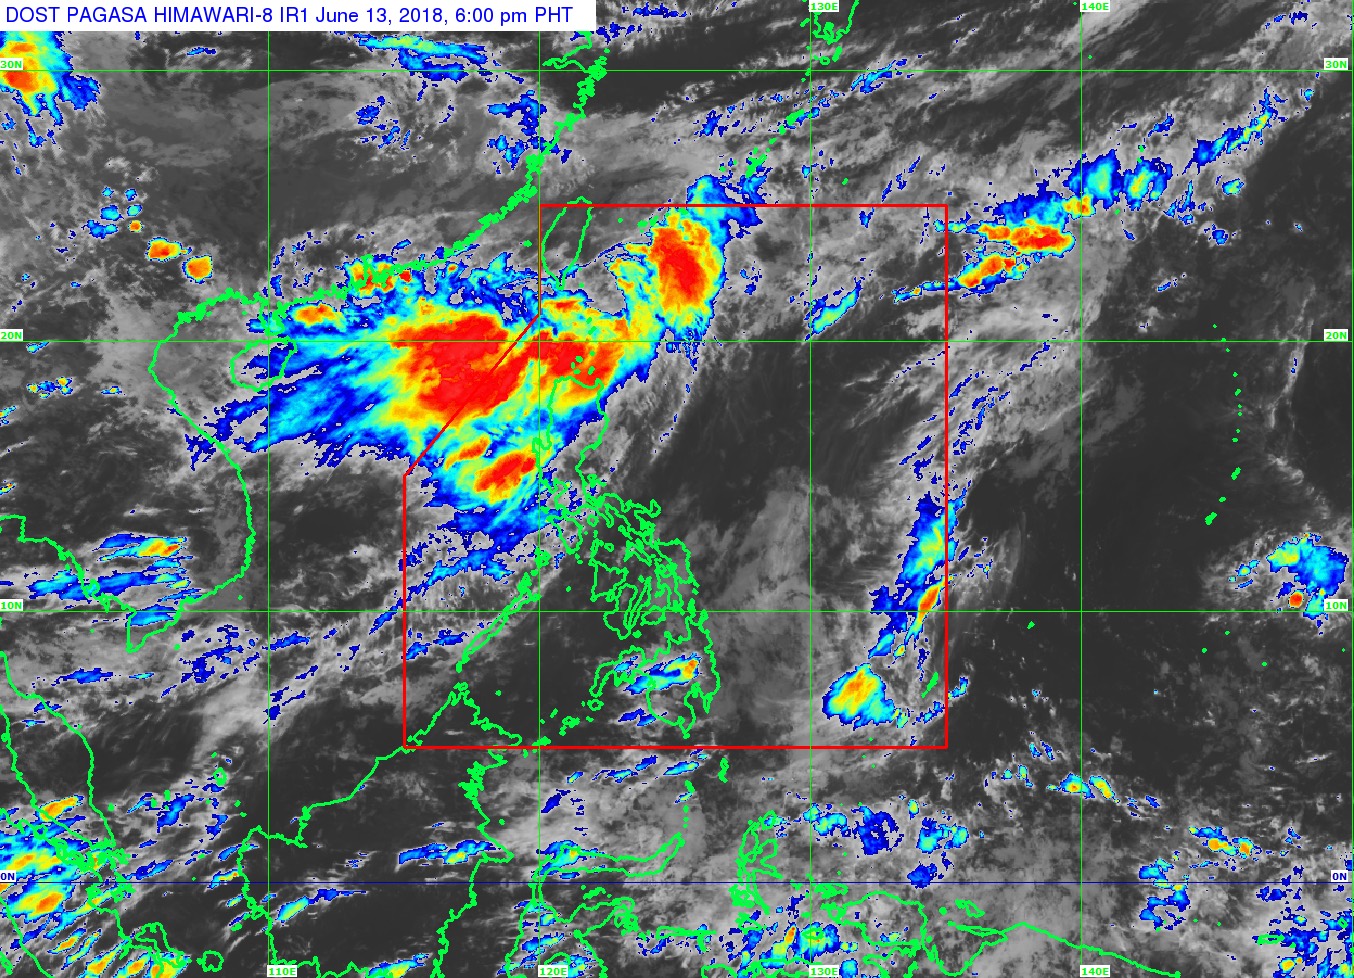 Satellite image as of June 13, 2018, 6 pm. Image courtesy of PAGASA 